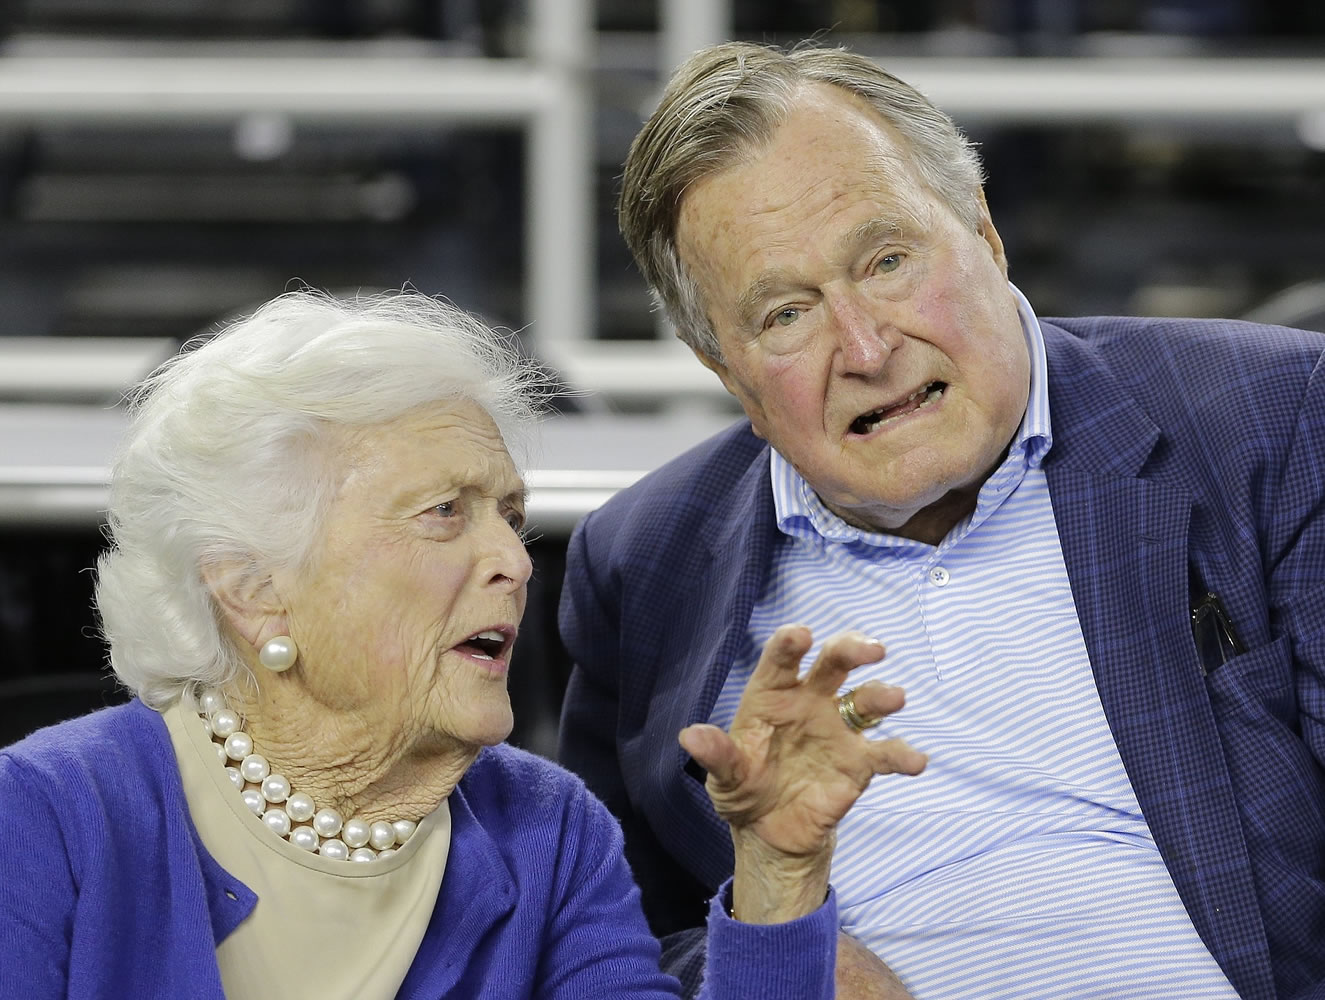 Former President George H.W. Bush and his wife, Barbara, speak in March before the first half of an NCAAA college basketball game in Houston. A spokesman says doctors are pleased with the progress the former president is making since he fractured a bone in his neck during a fall.